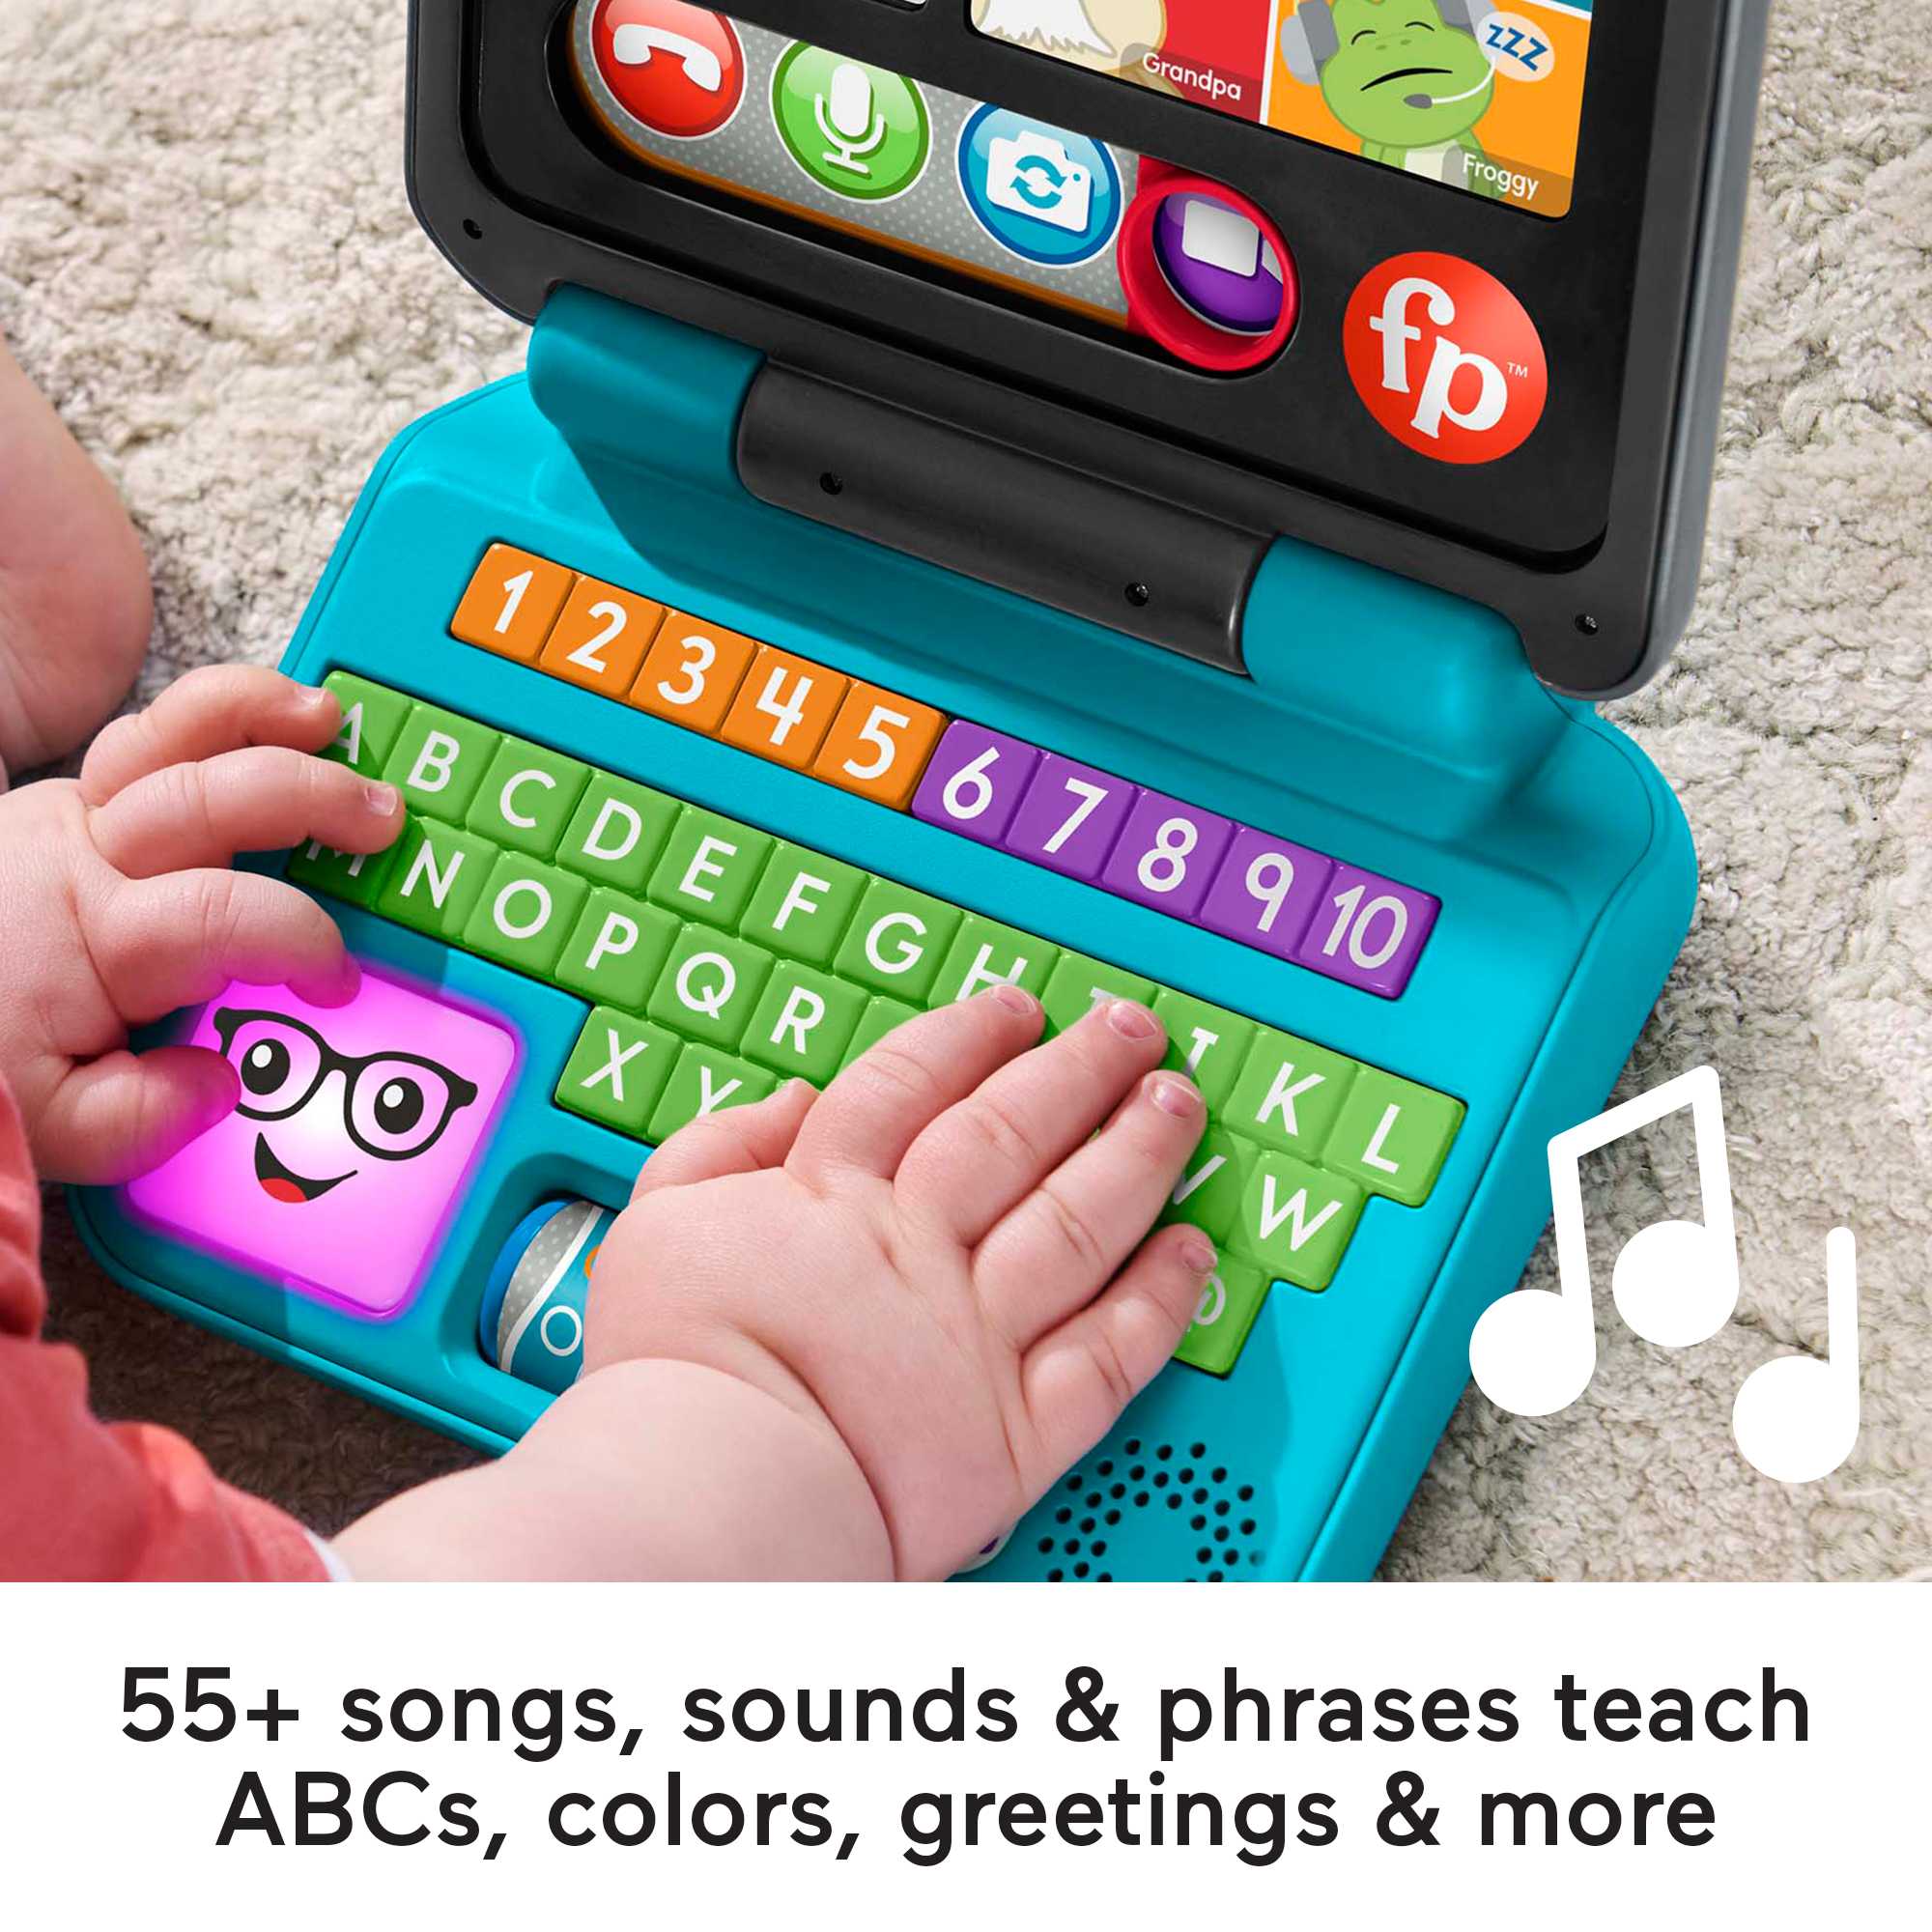 Fisher Price Laugh & Learn Let's Connect Laptop - Albagame